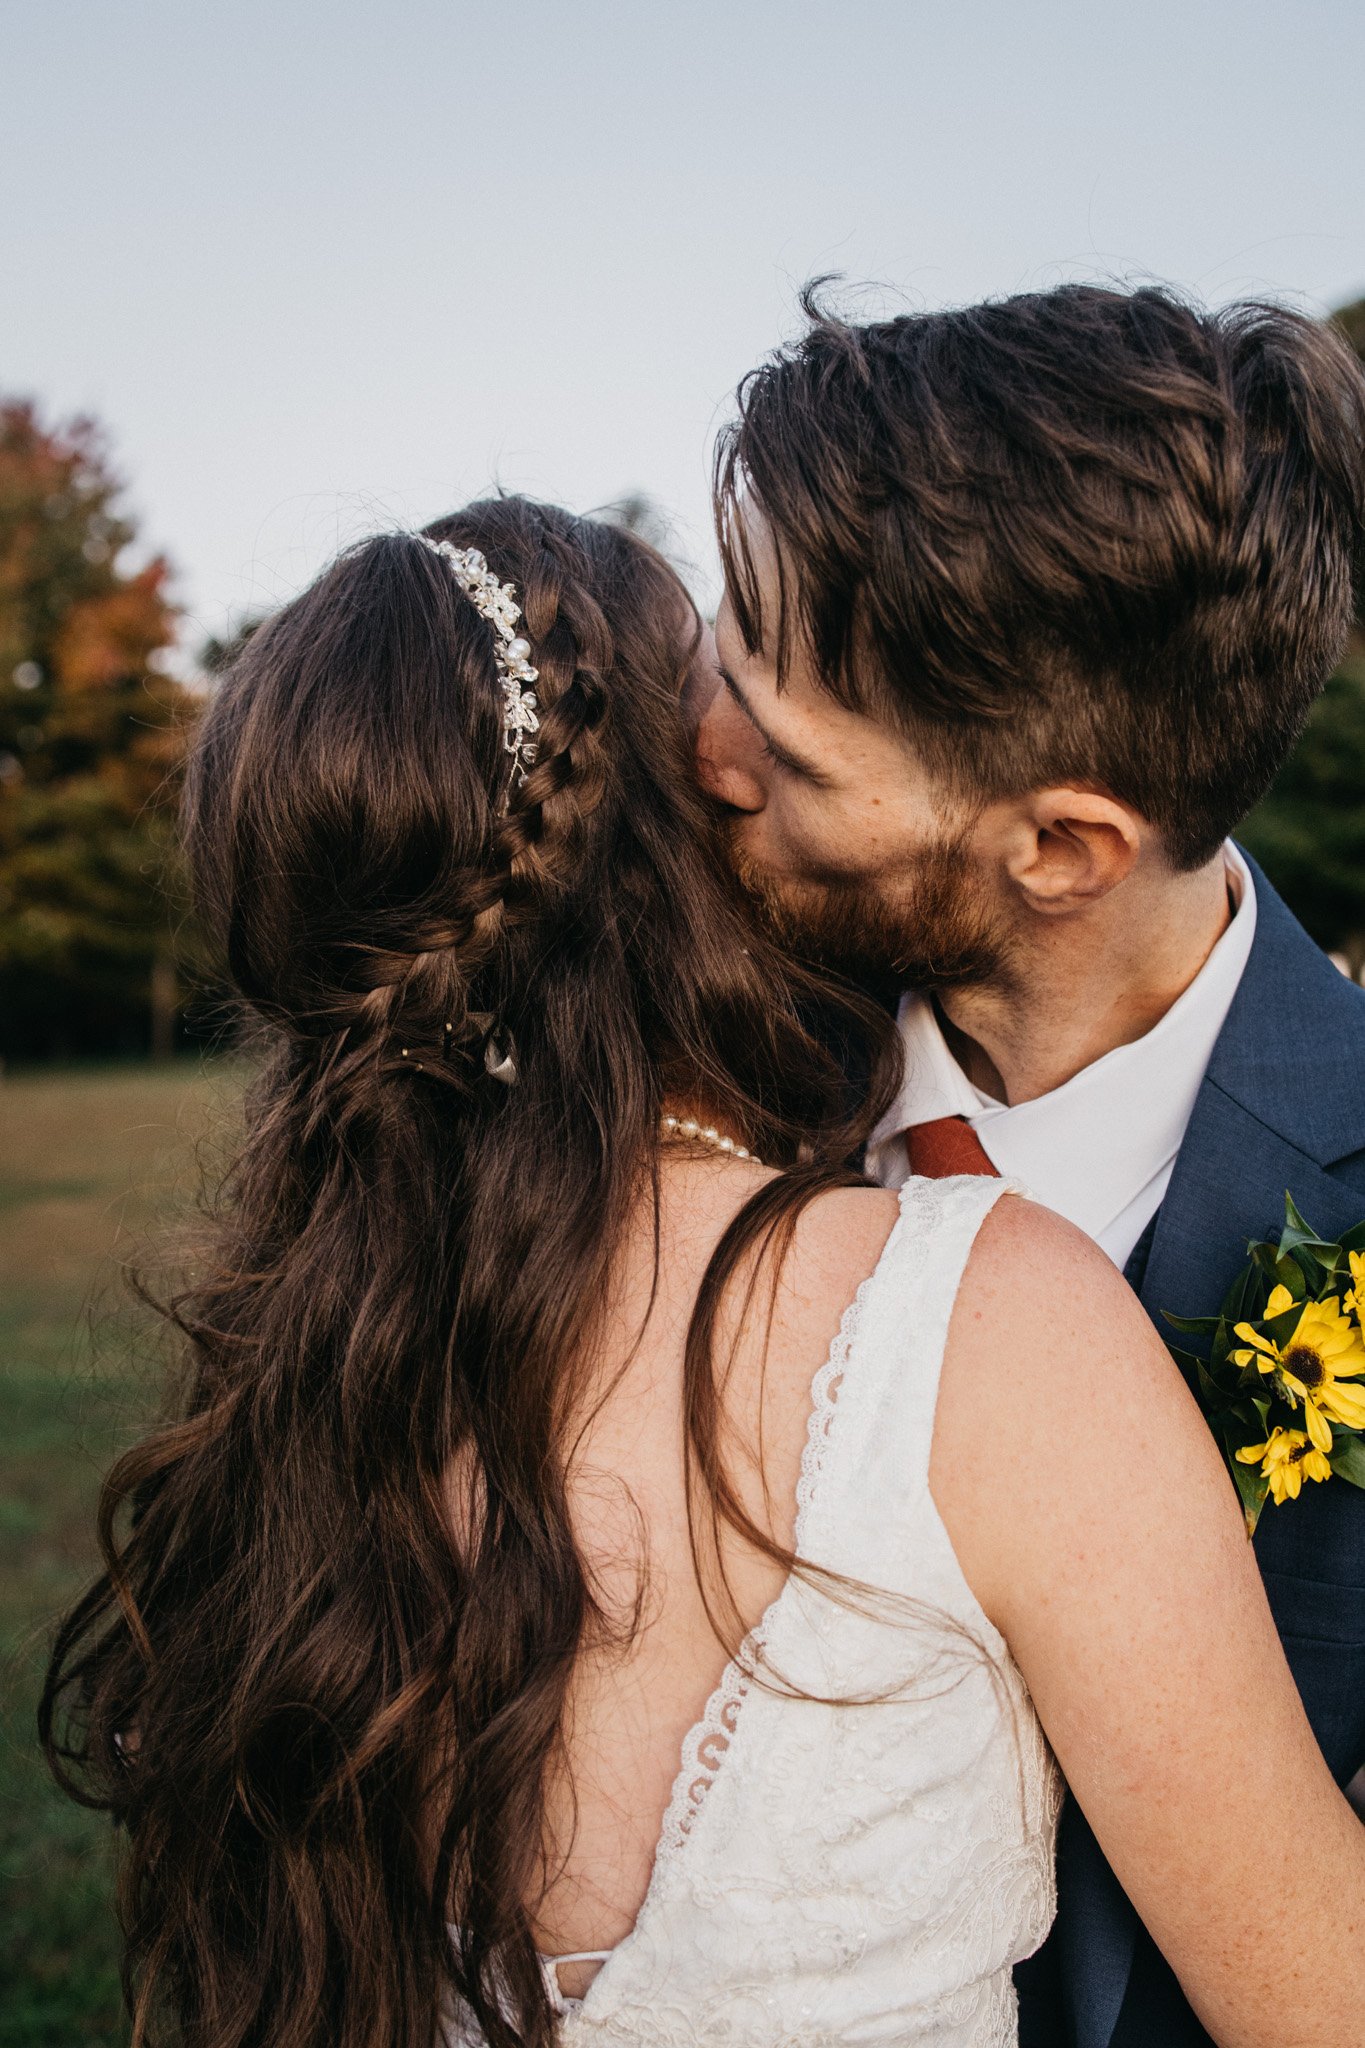 A groom kisses the side of the brides head.